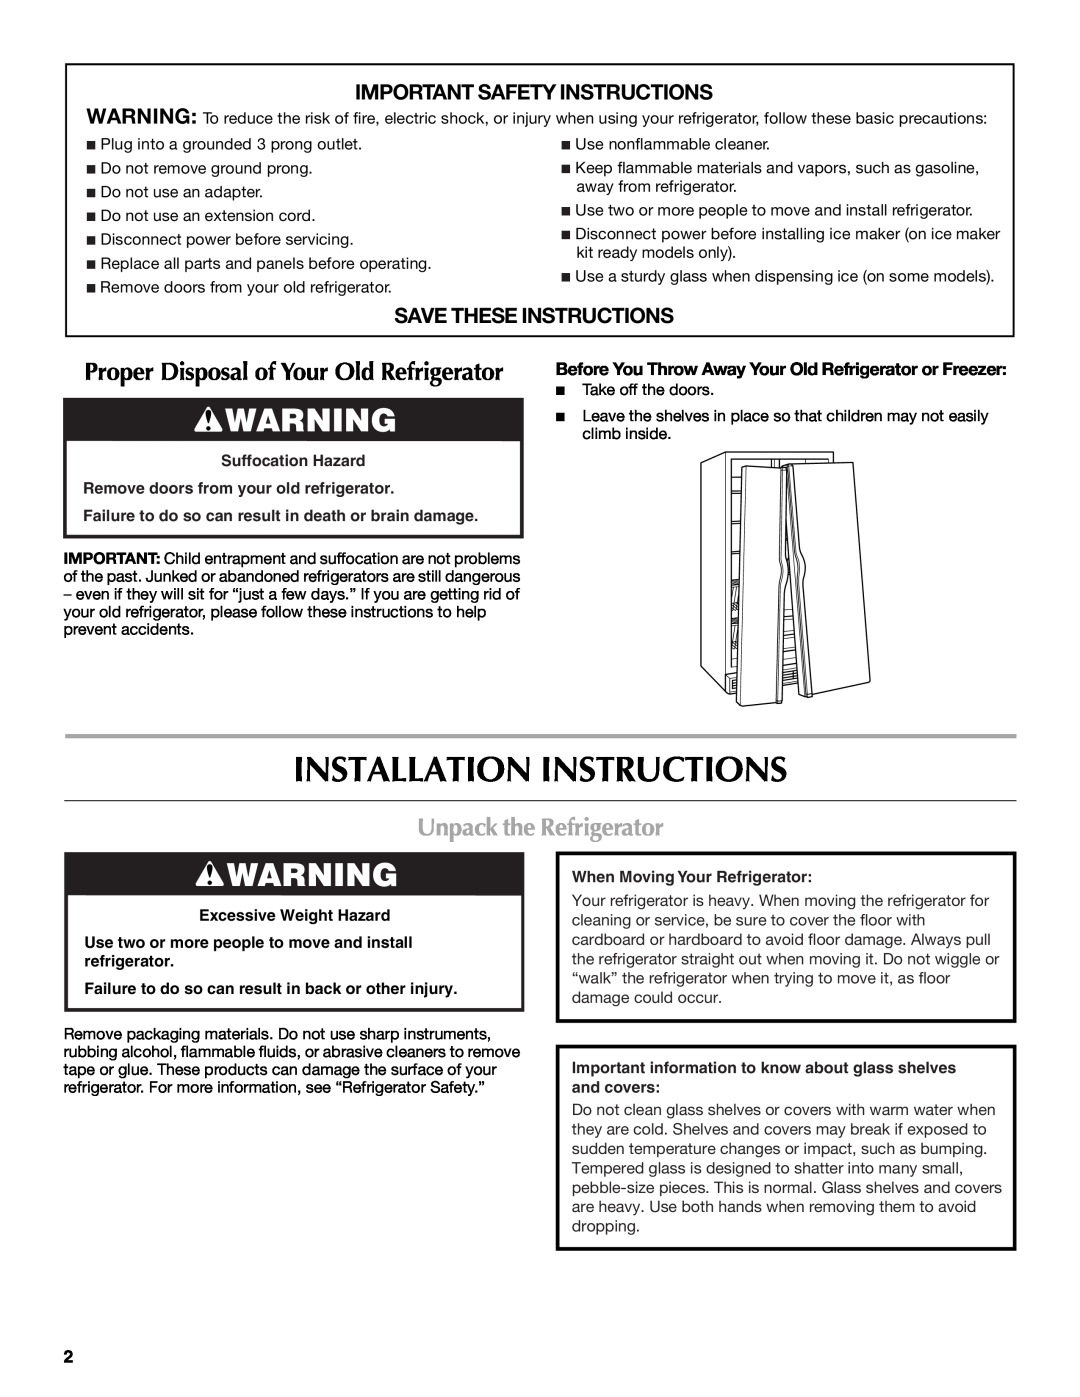 Maytag MSD2272VES Installation Instructions, Unpack the Refrigerator, Important Safety Instructions, Suffocation Hazard 